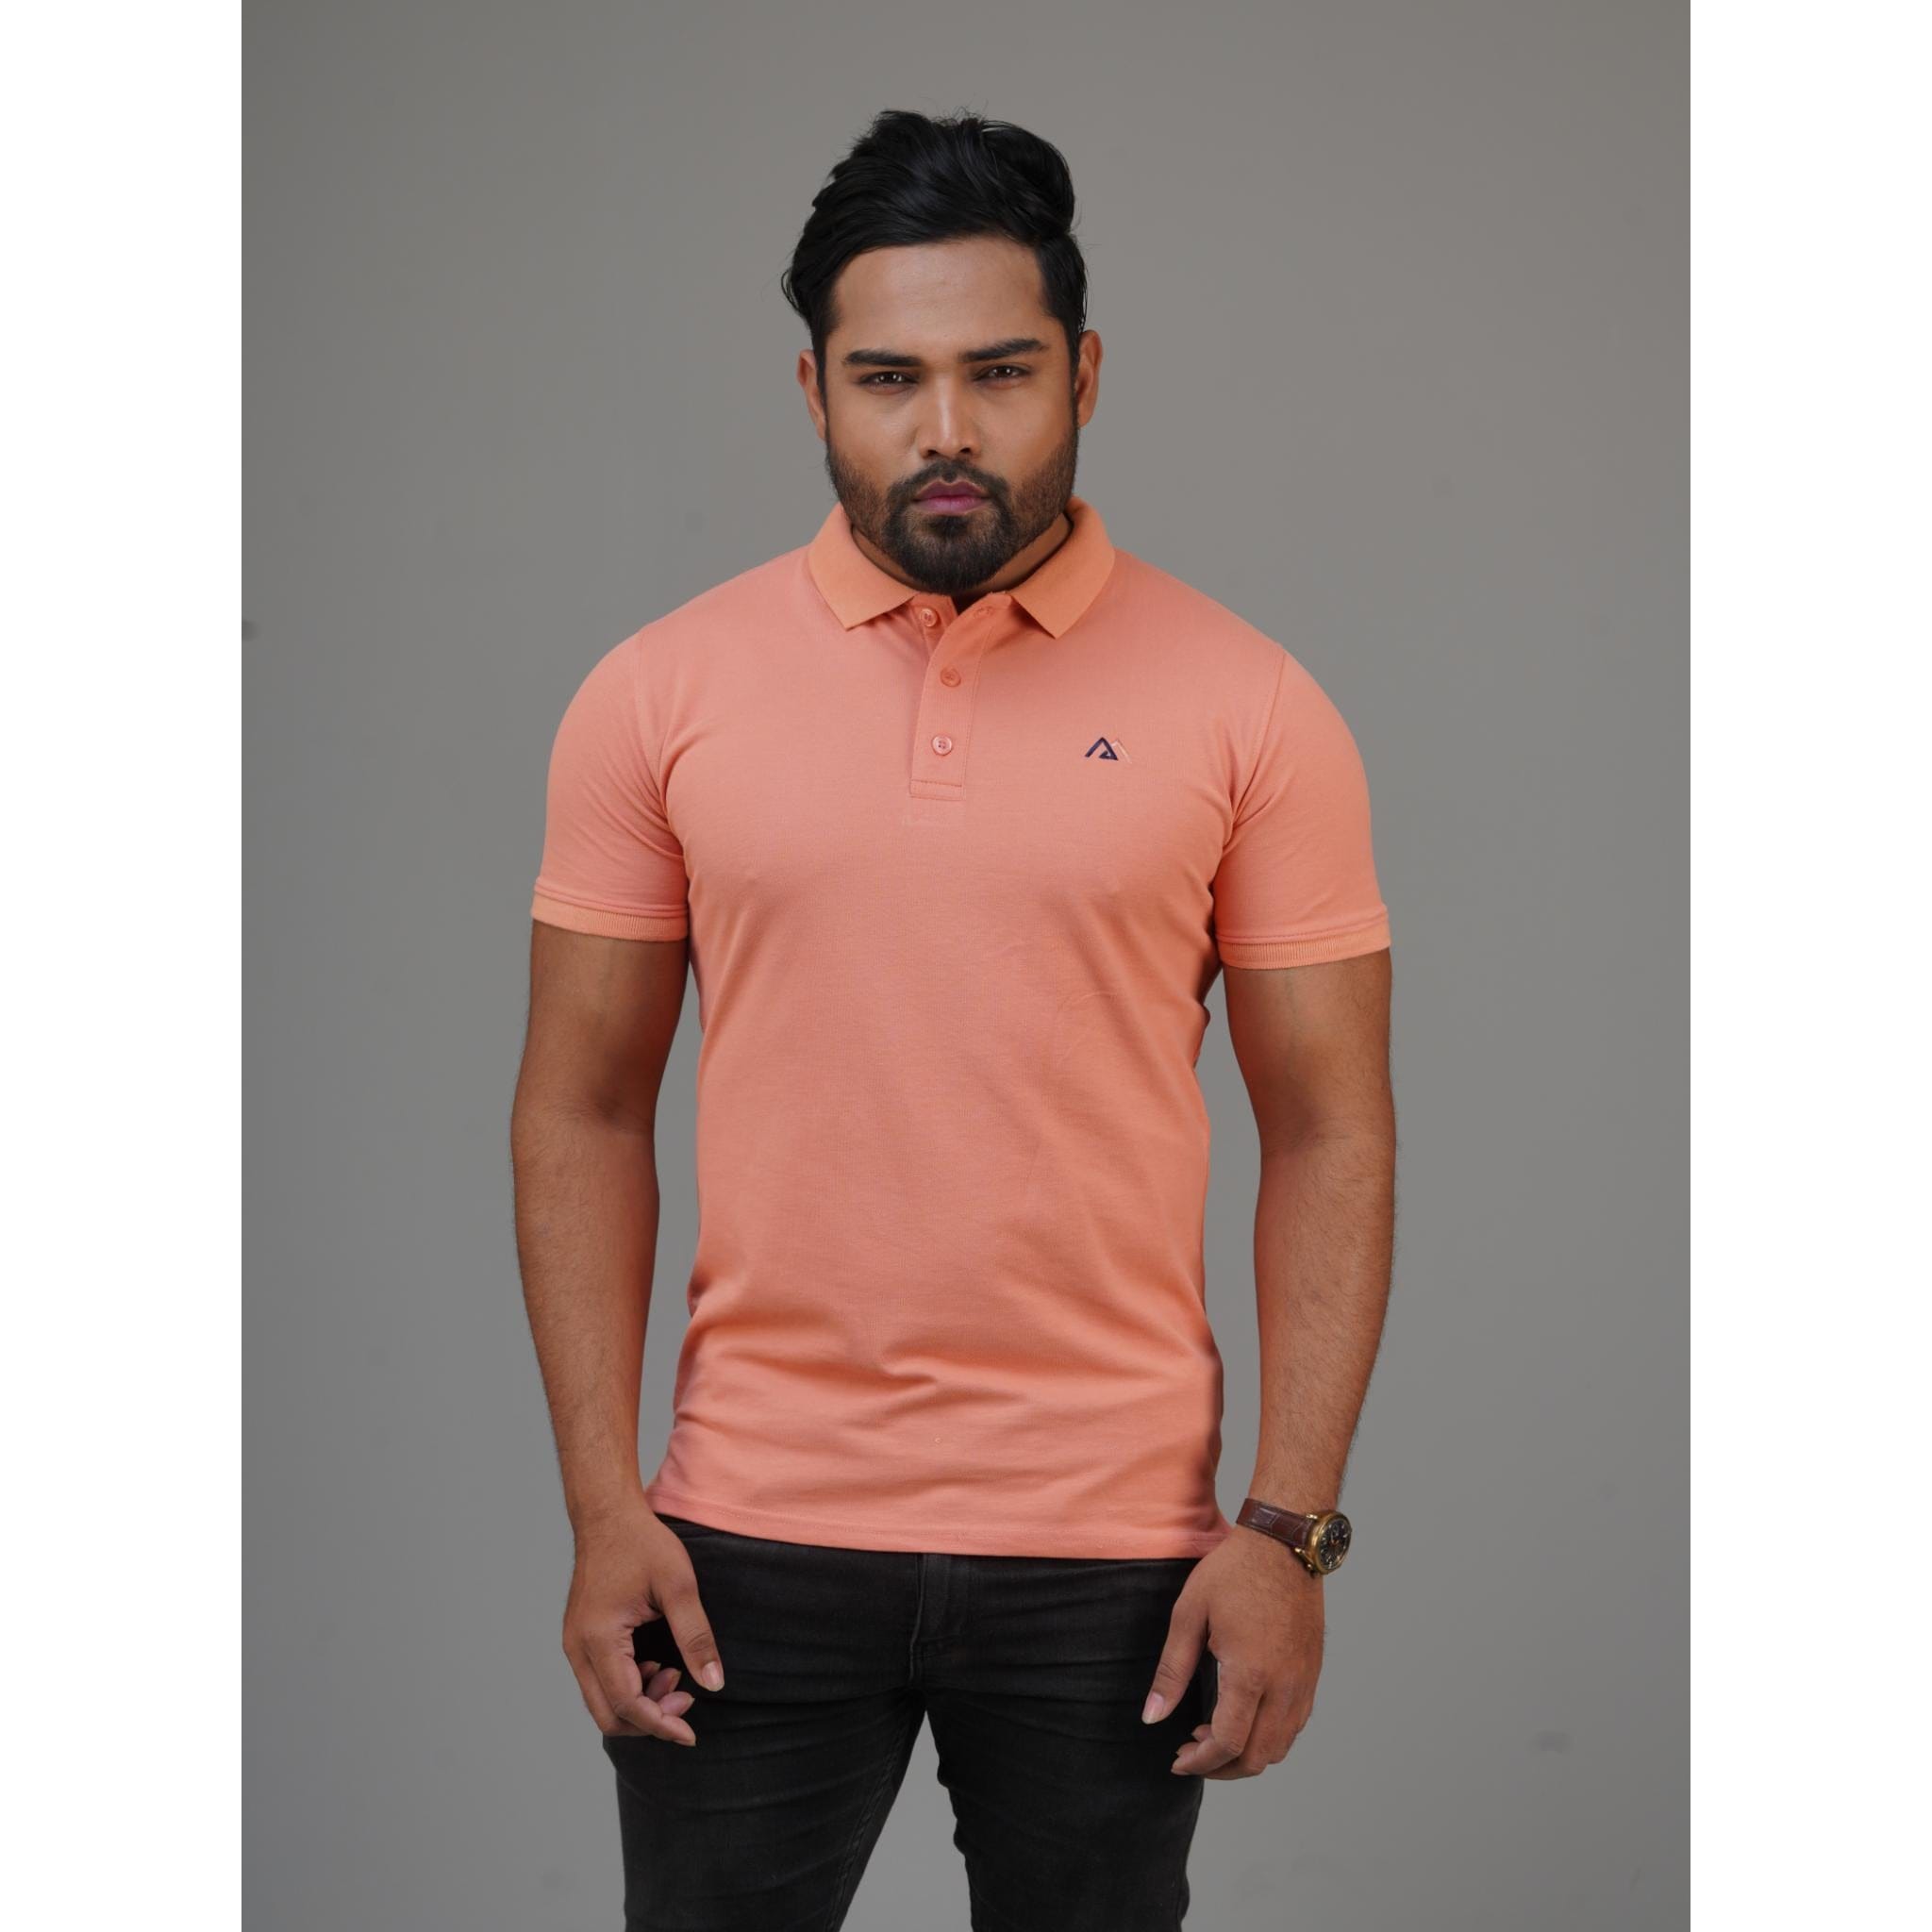 Polo Shirt for Men | Solid Misti Color